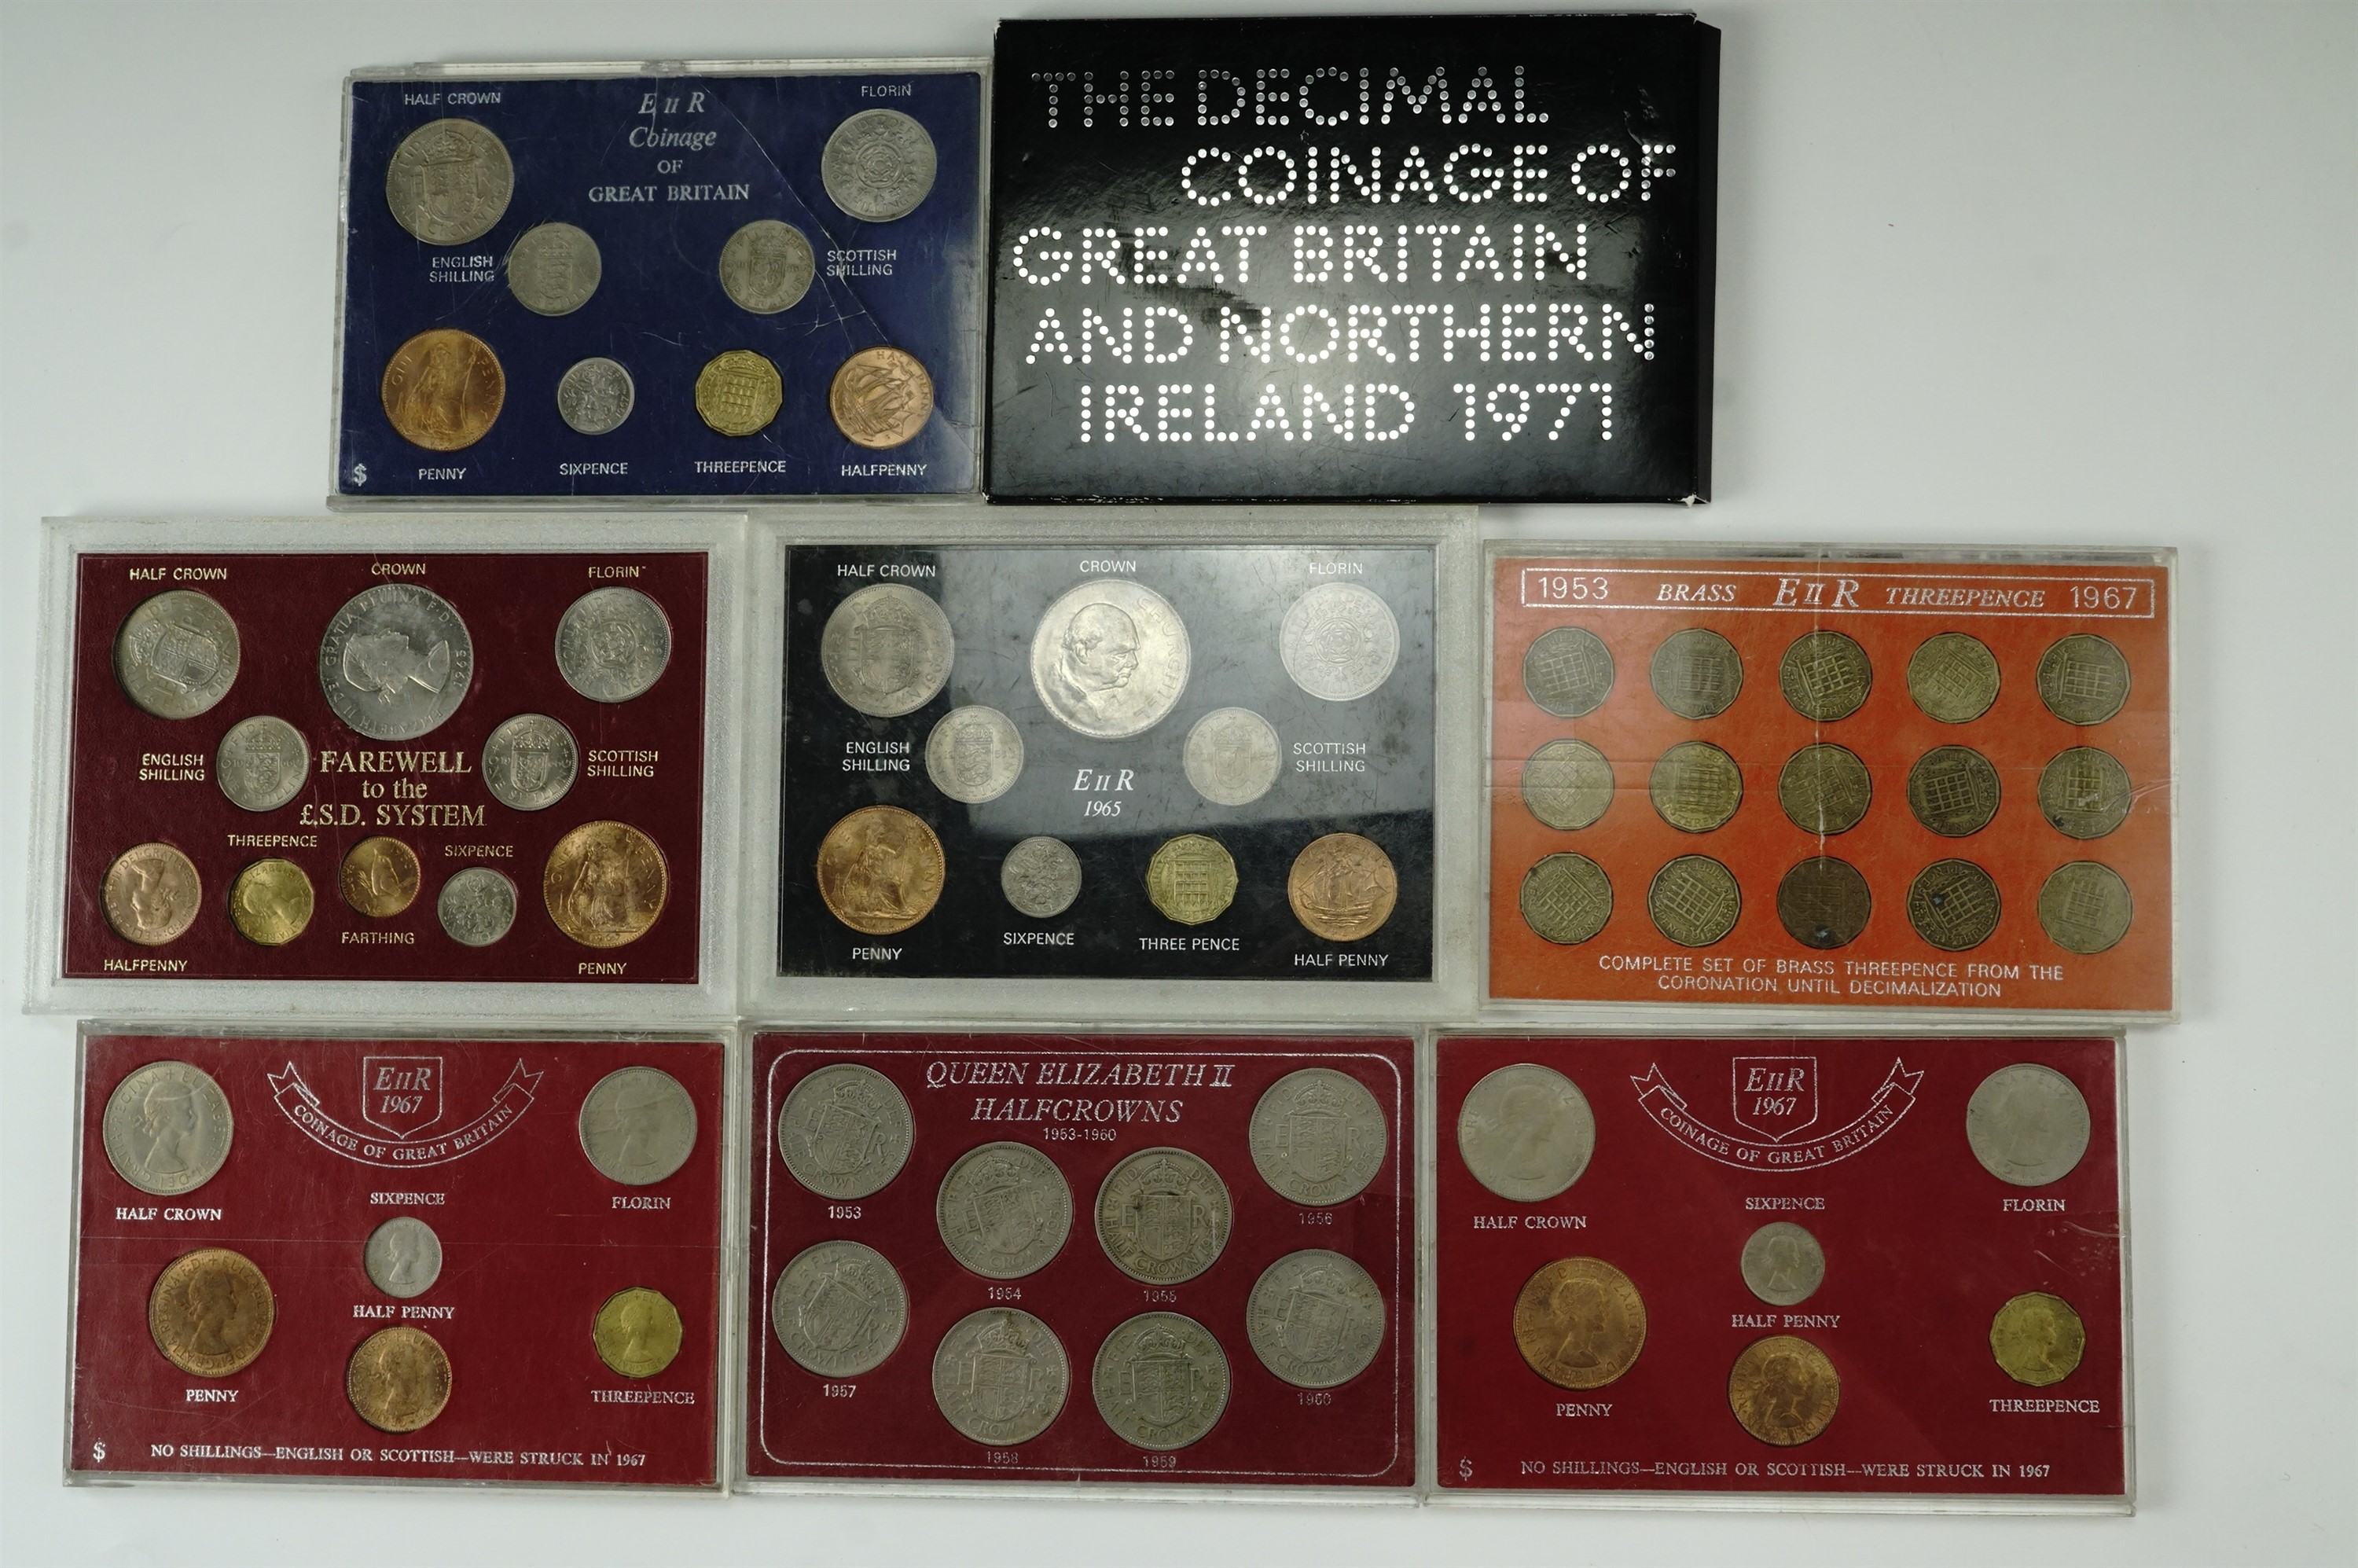 Cased coin sets including "EII R 1965", "Farewell to the £.S.D system", "QEII half crowns 1953-1960"